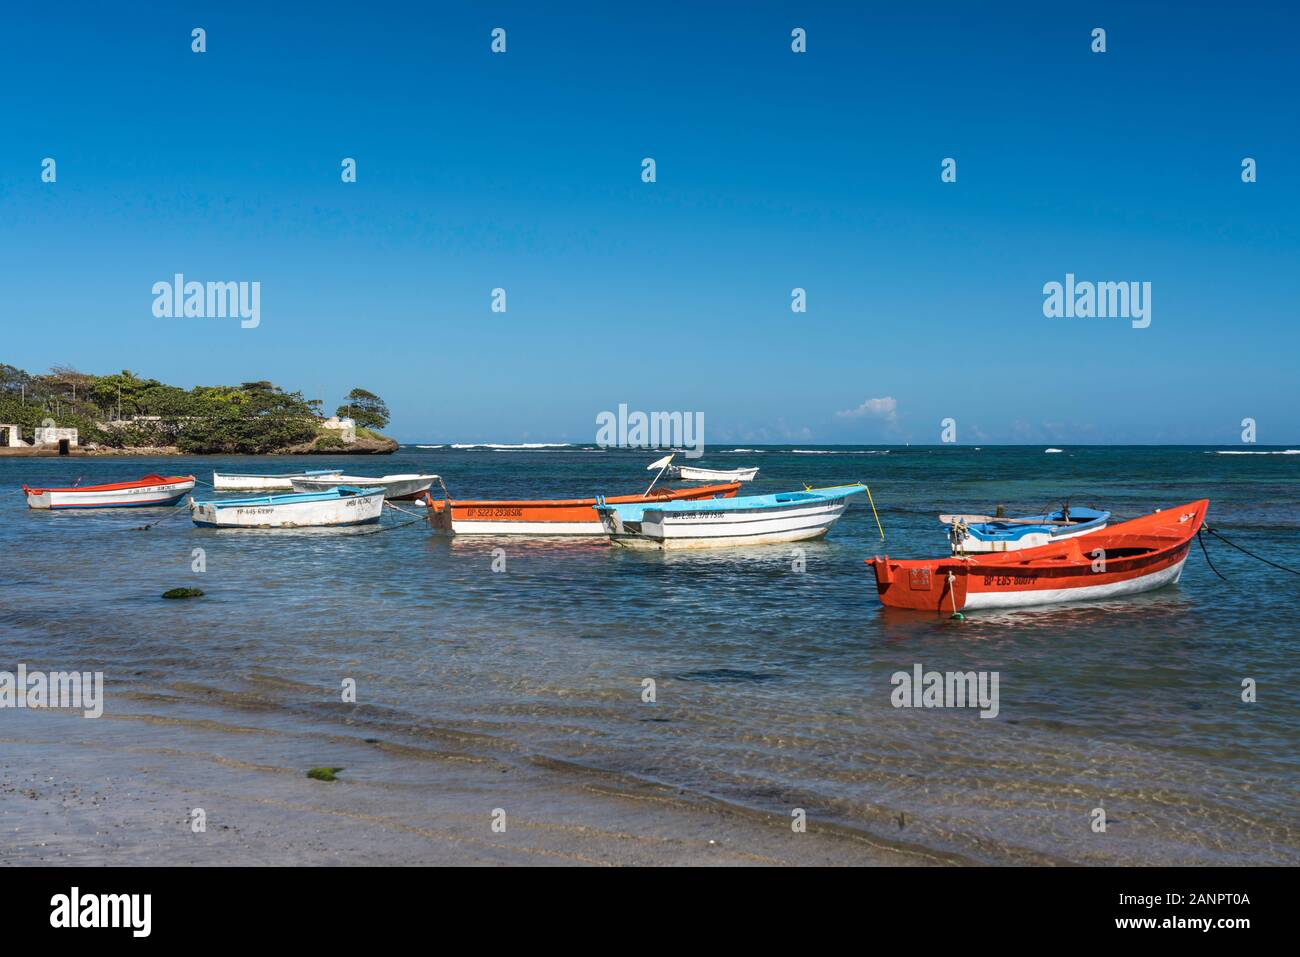 Colorful fishing boats in the water in Puerto Plata, Dominican Republic, Caribbean. Stock Photo